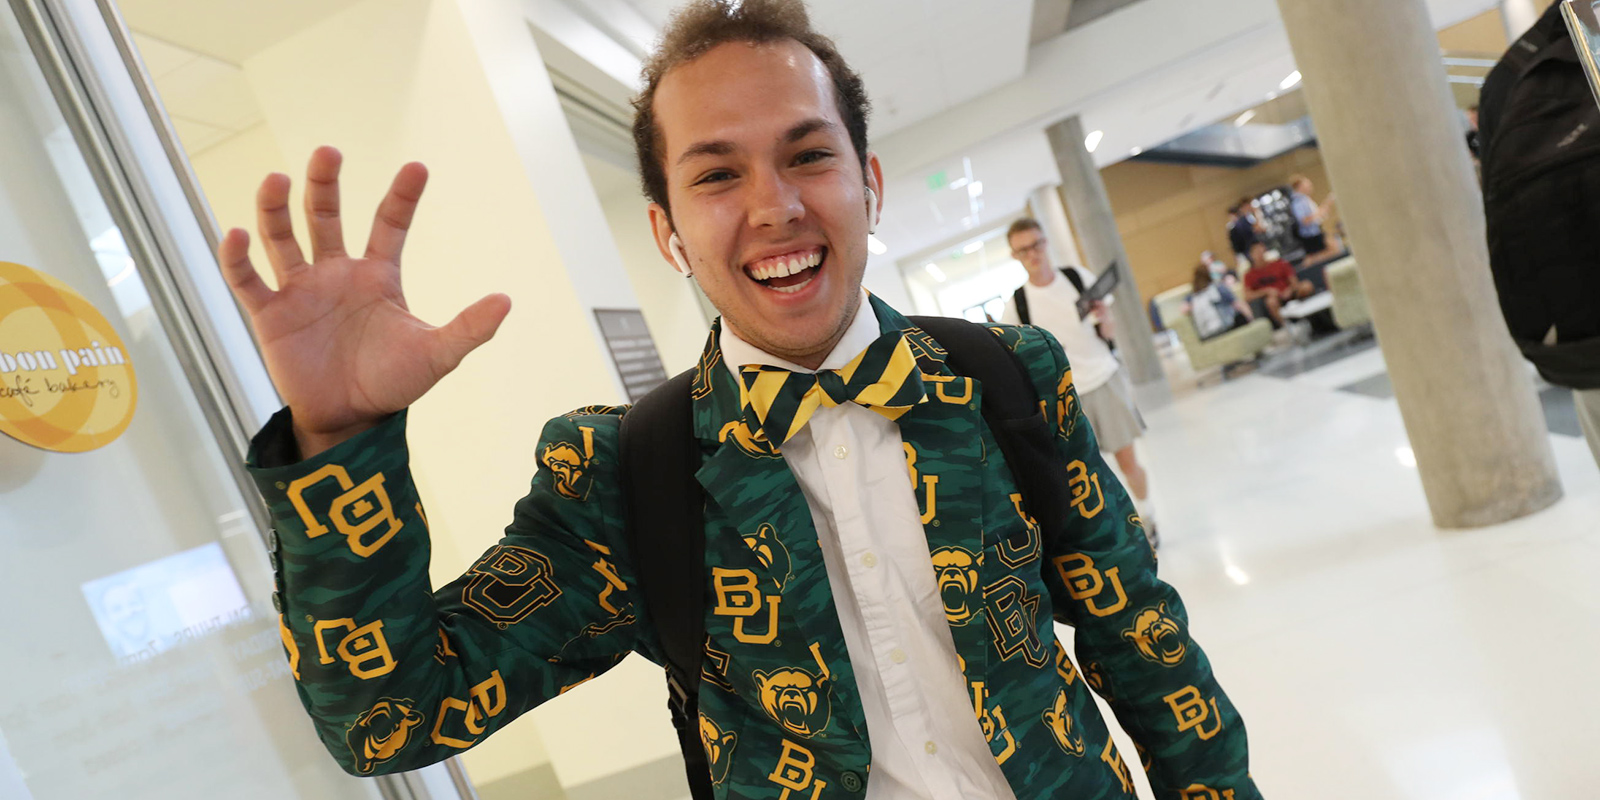 A Baylor student wearing a green-and-gold sportcoat with Baylor logos all over